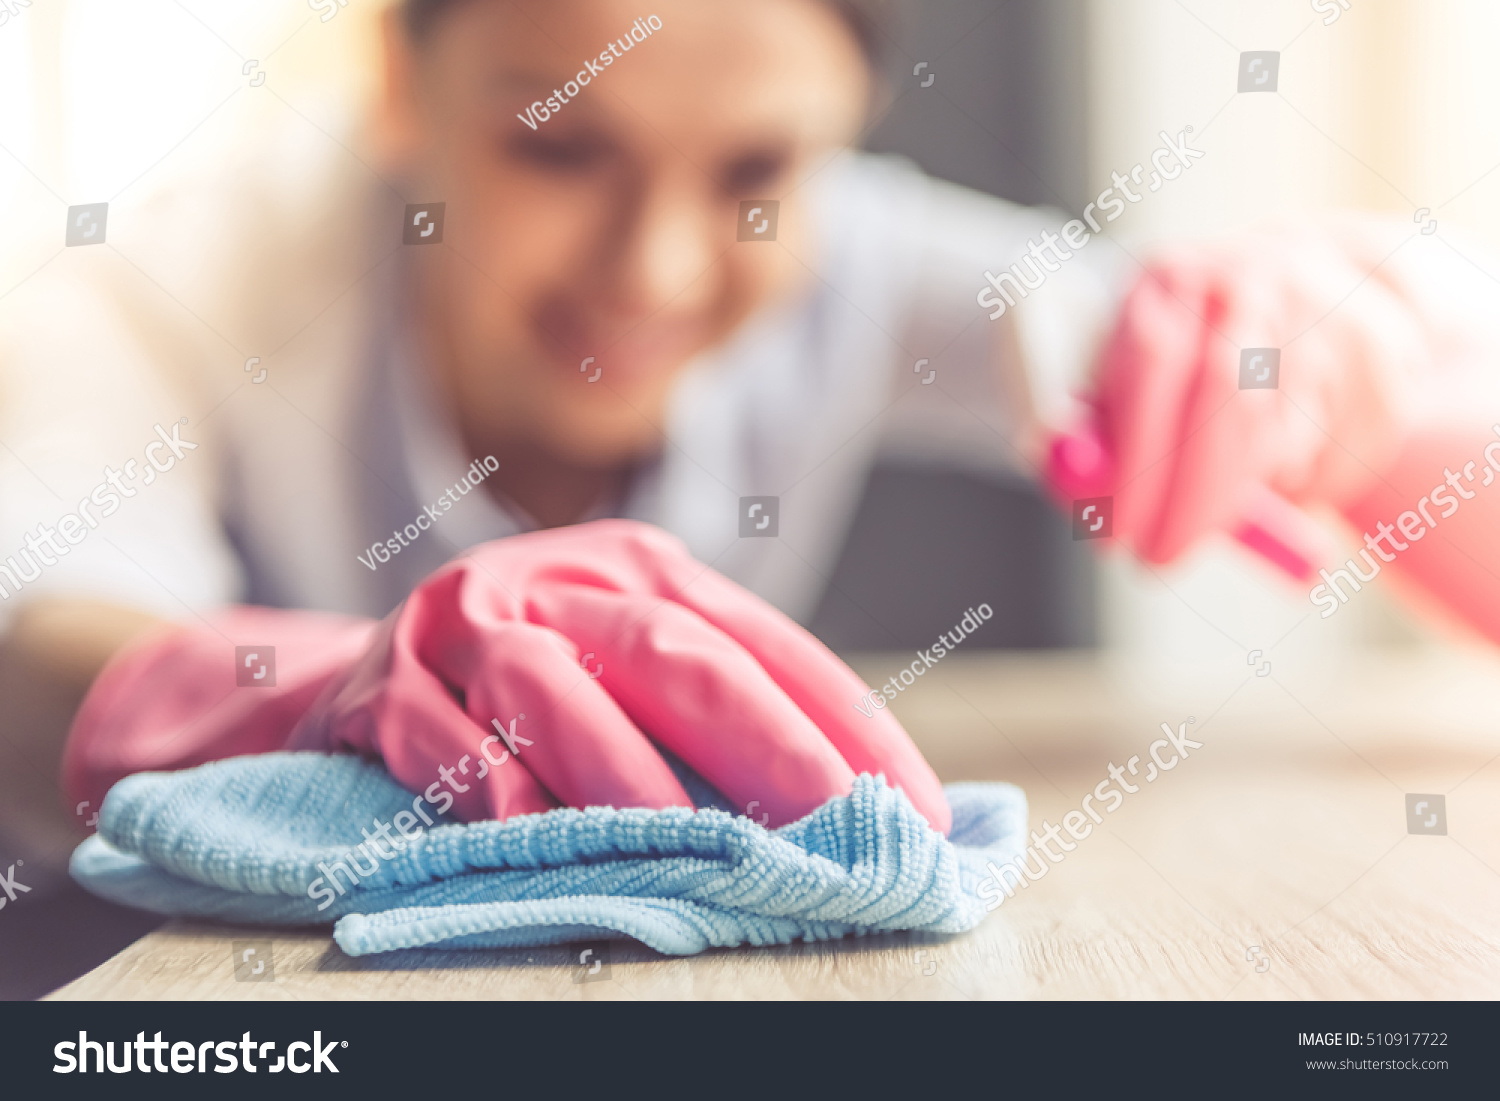 Woman in protective gloves is smiling and wiping dust using a spray and a duster while cleaning her house, close-up #510917722